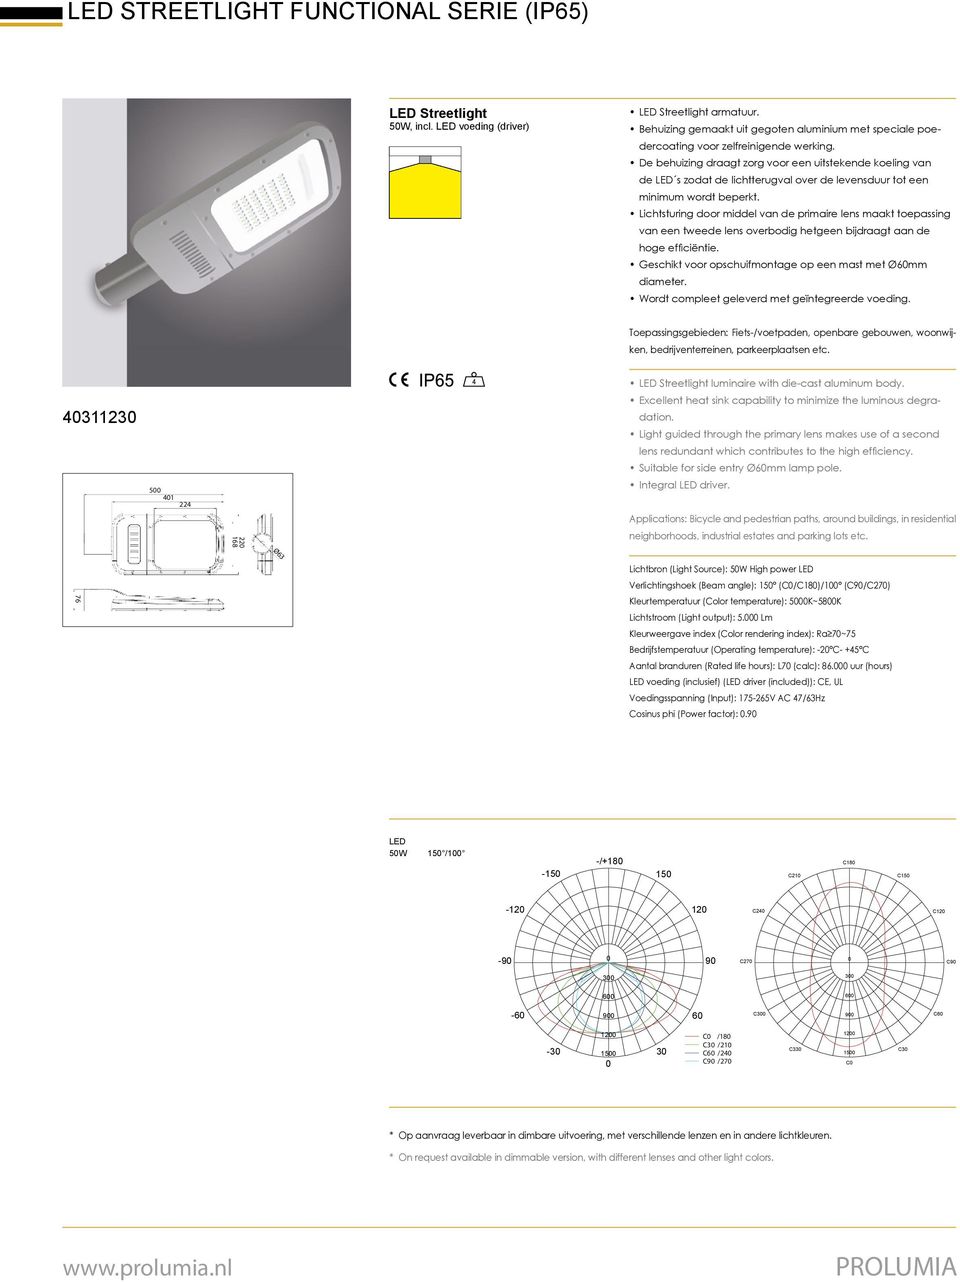 Suitable for side entry Ø6mm lamp pole. Integral driver.